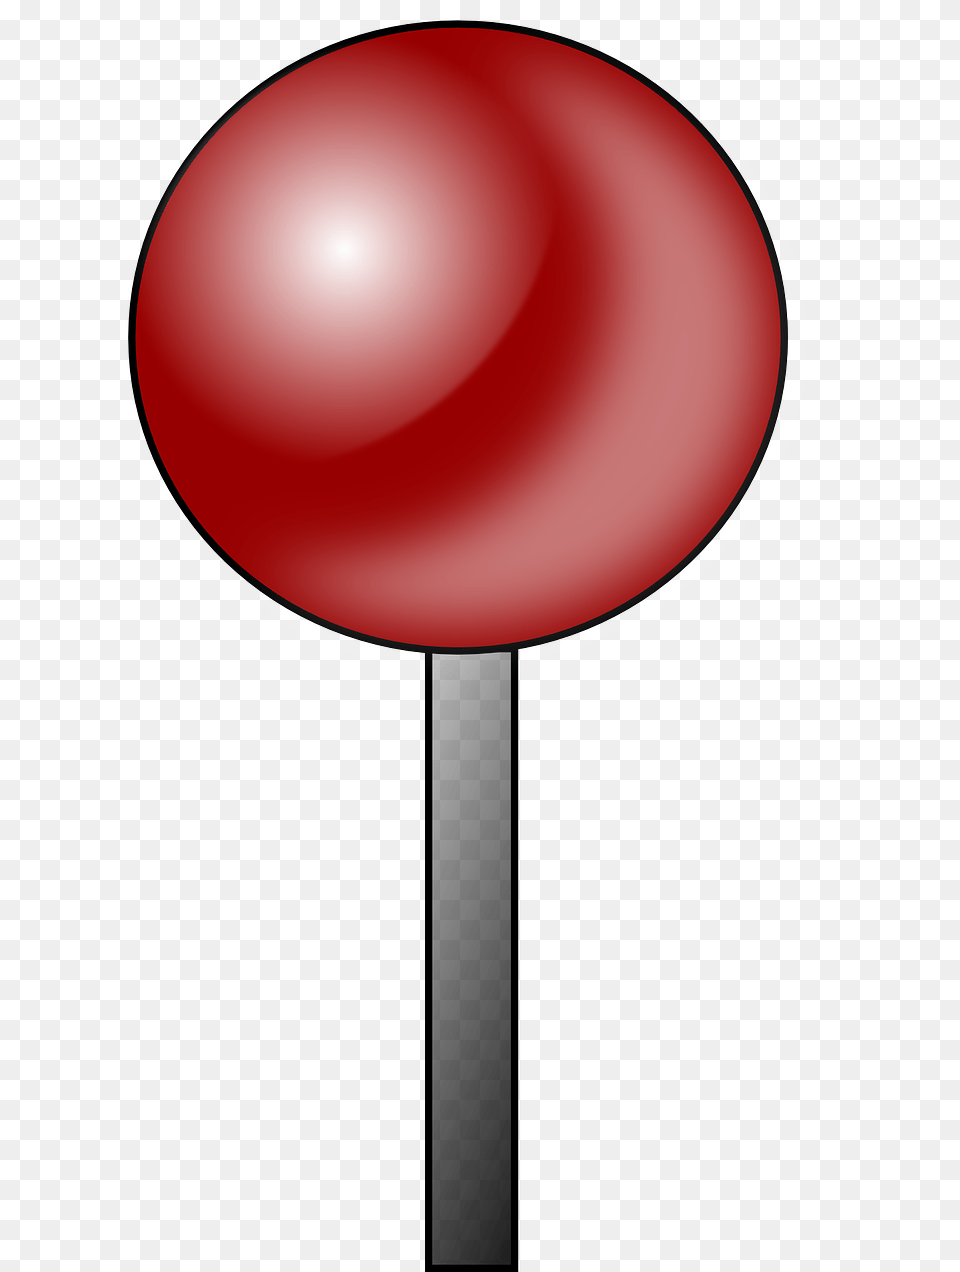 Lollipop Free To Use Cliparts Hnh Nh Hnh Ko Mt, Candy, Food, Sweets, Astronomy Png Image